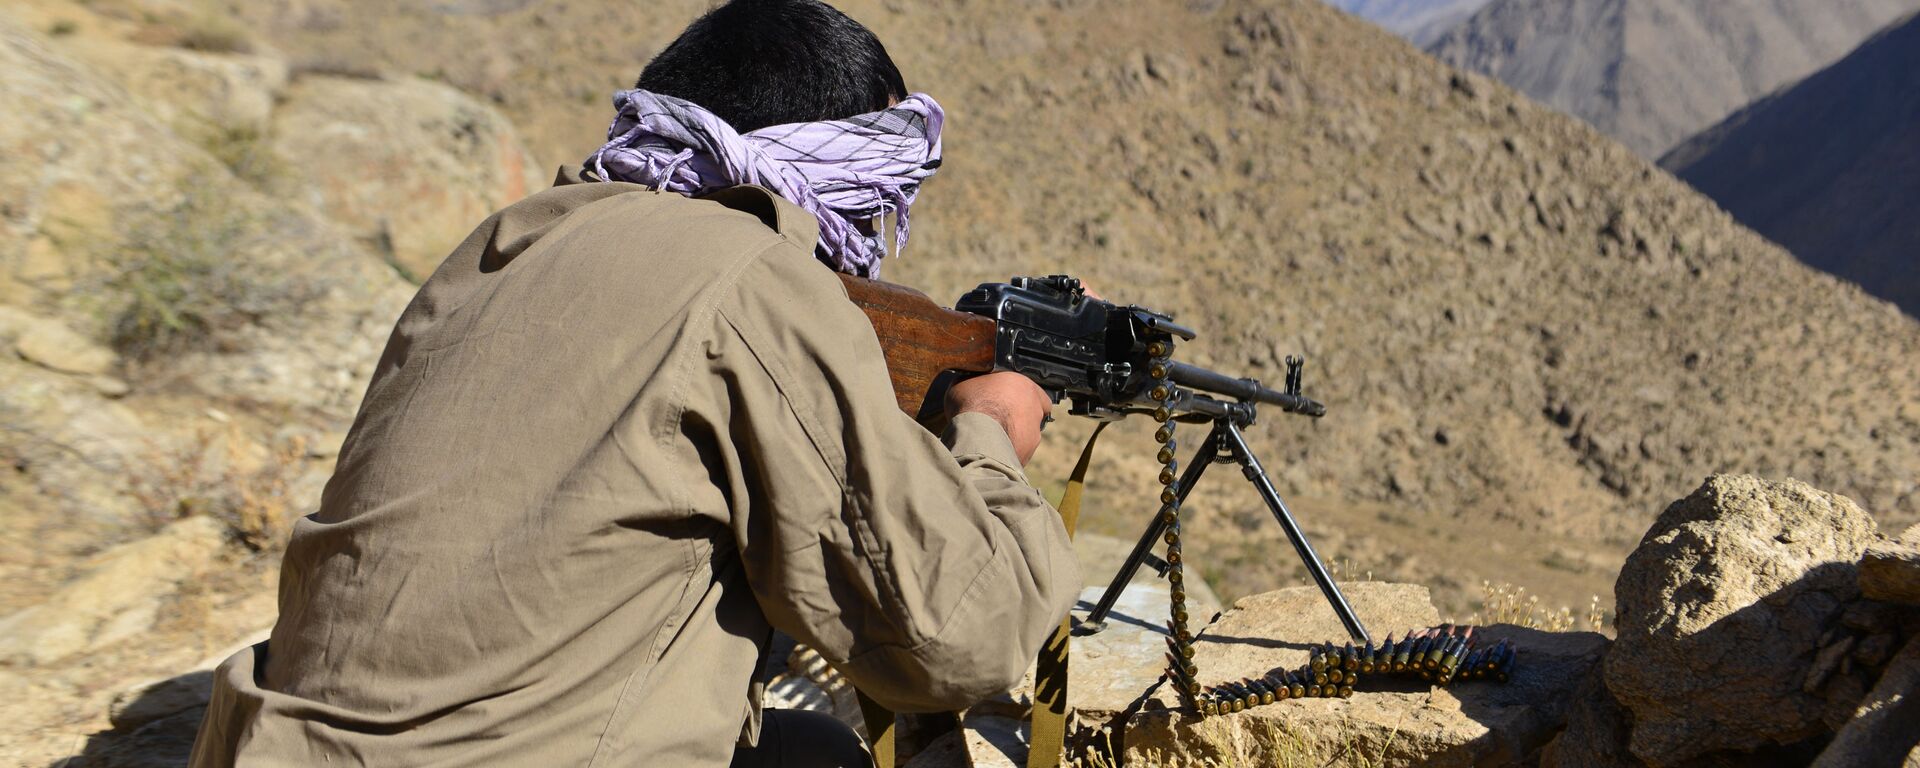 An Afghan resistance movement and anti-Taliban uprising forces personnel takes part in a military training at Malimah area of Dara district in Panjshir province on September 2, 2021 as the valley remains the last major holdout of anti-Taliban forces. - Sputnik International, 1920, 03.09.2021